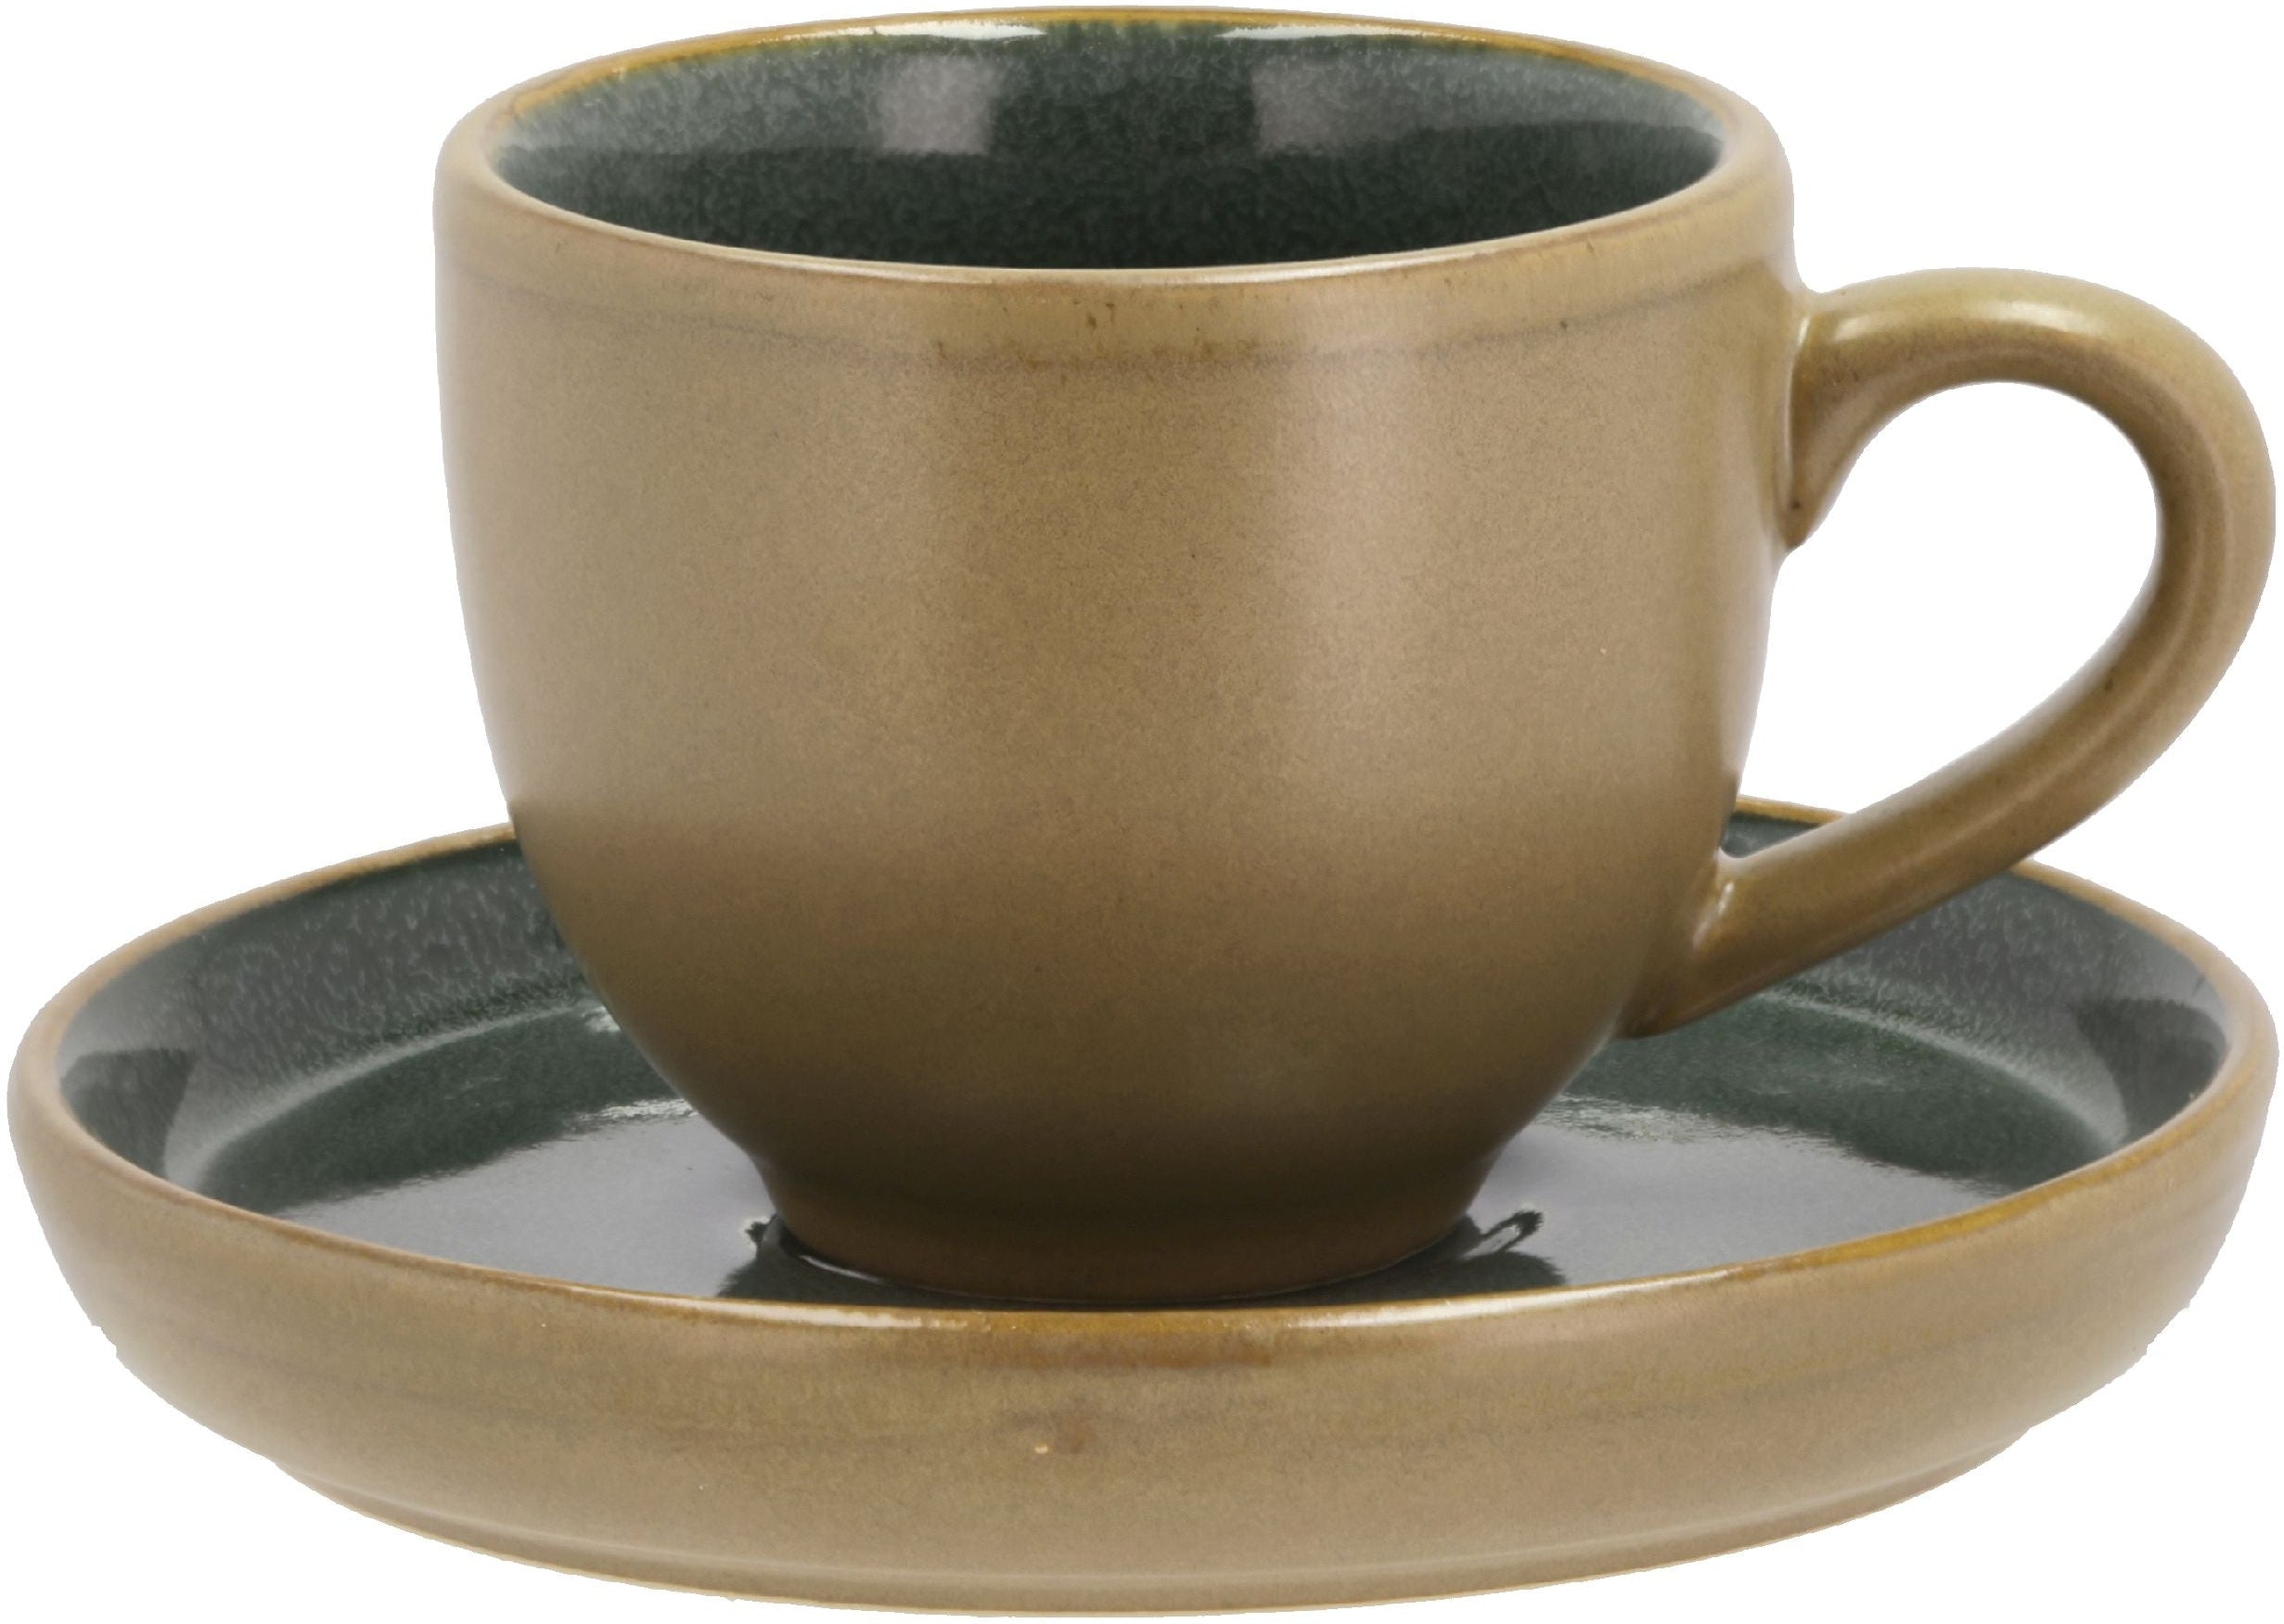 Bitz Espresso Cup With Saucer, Wood/Forest